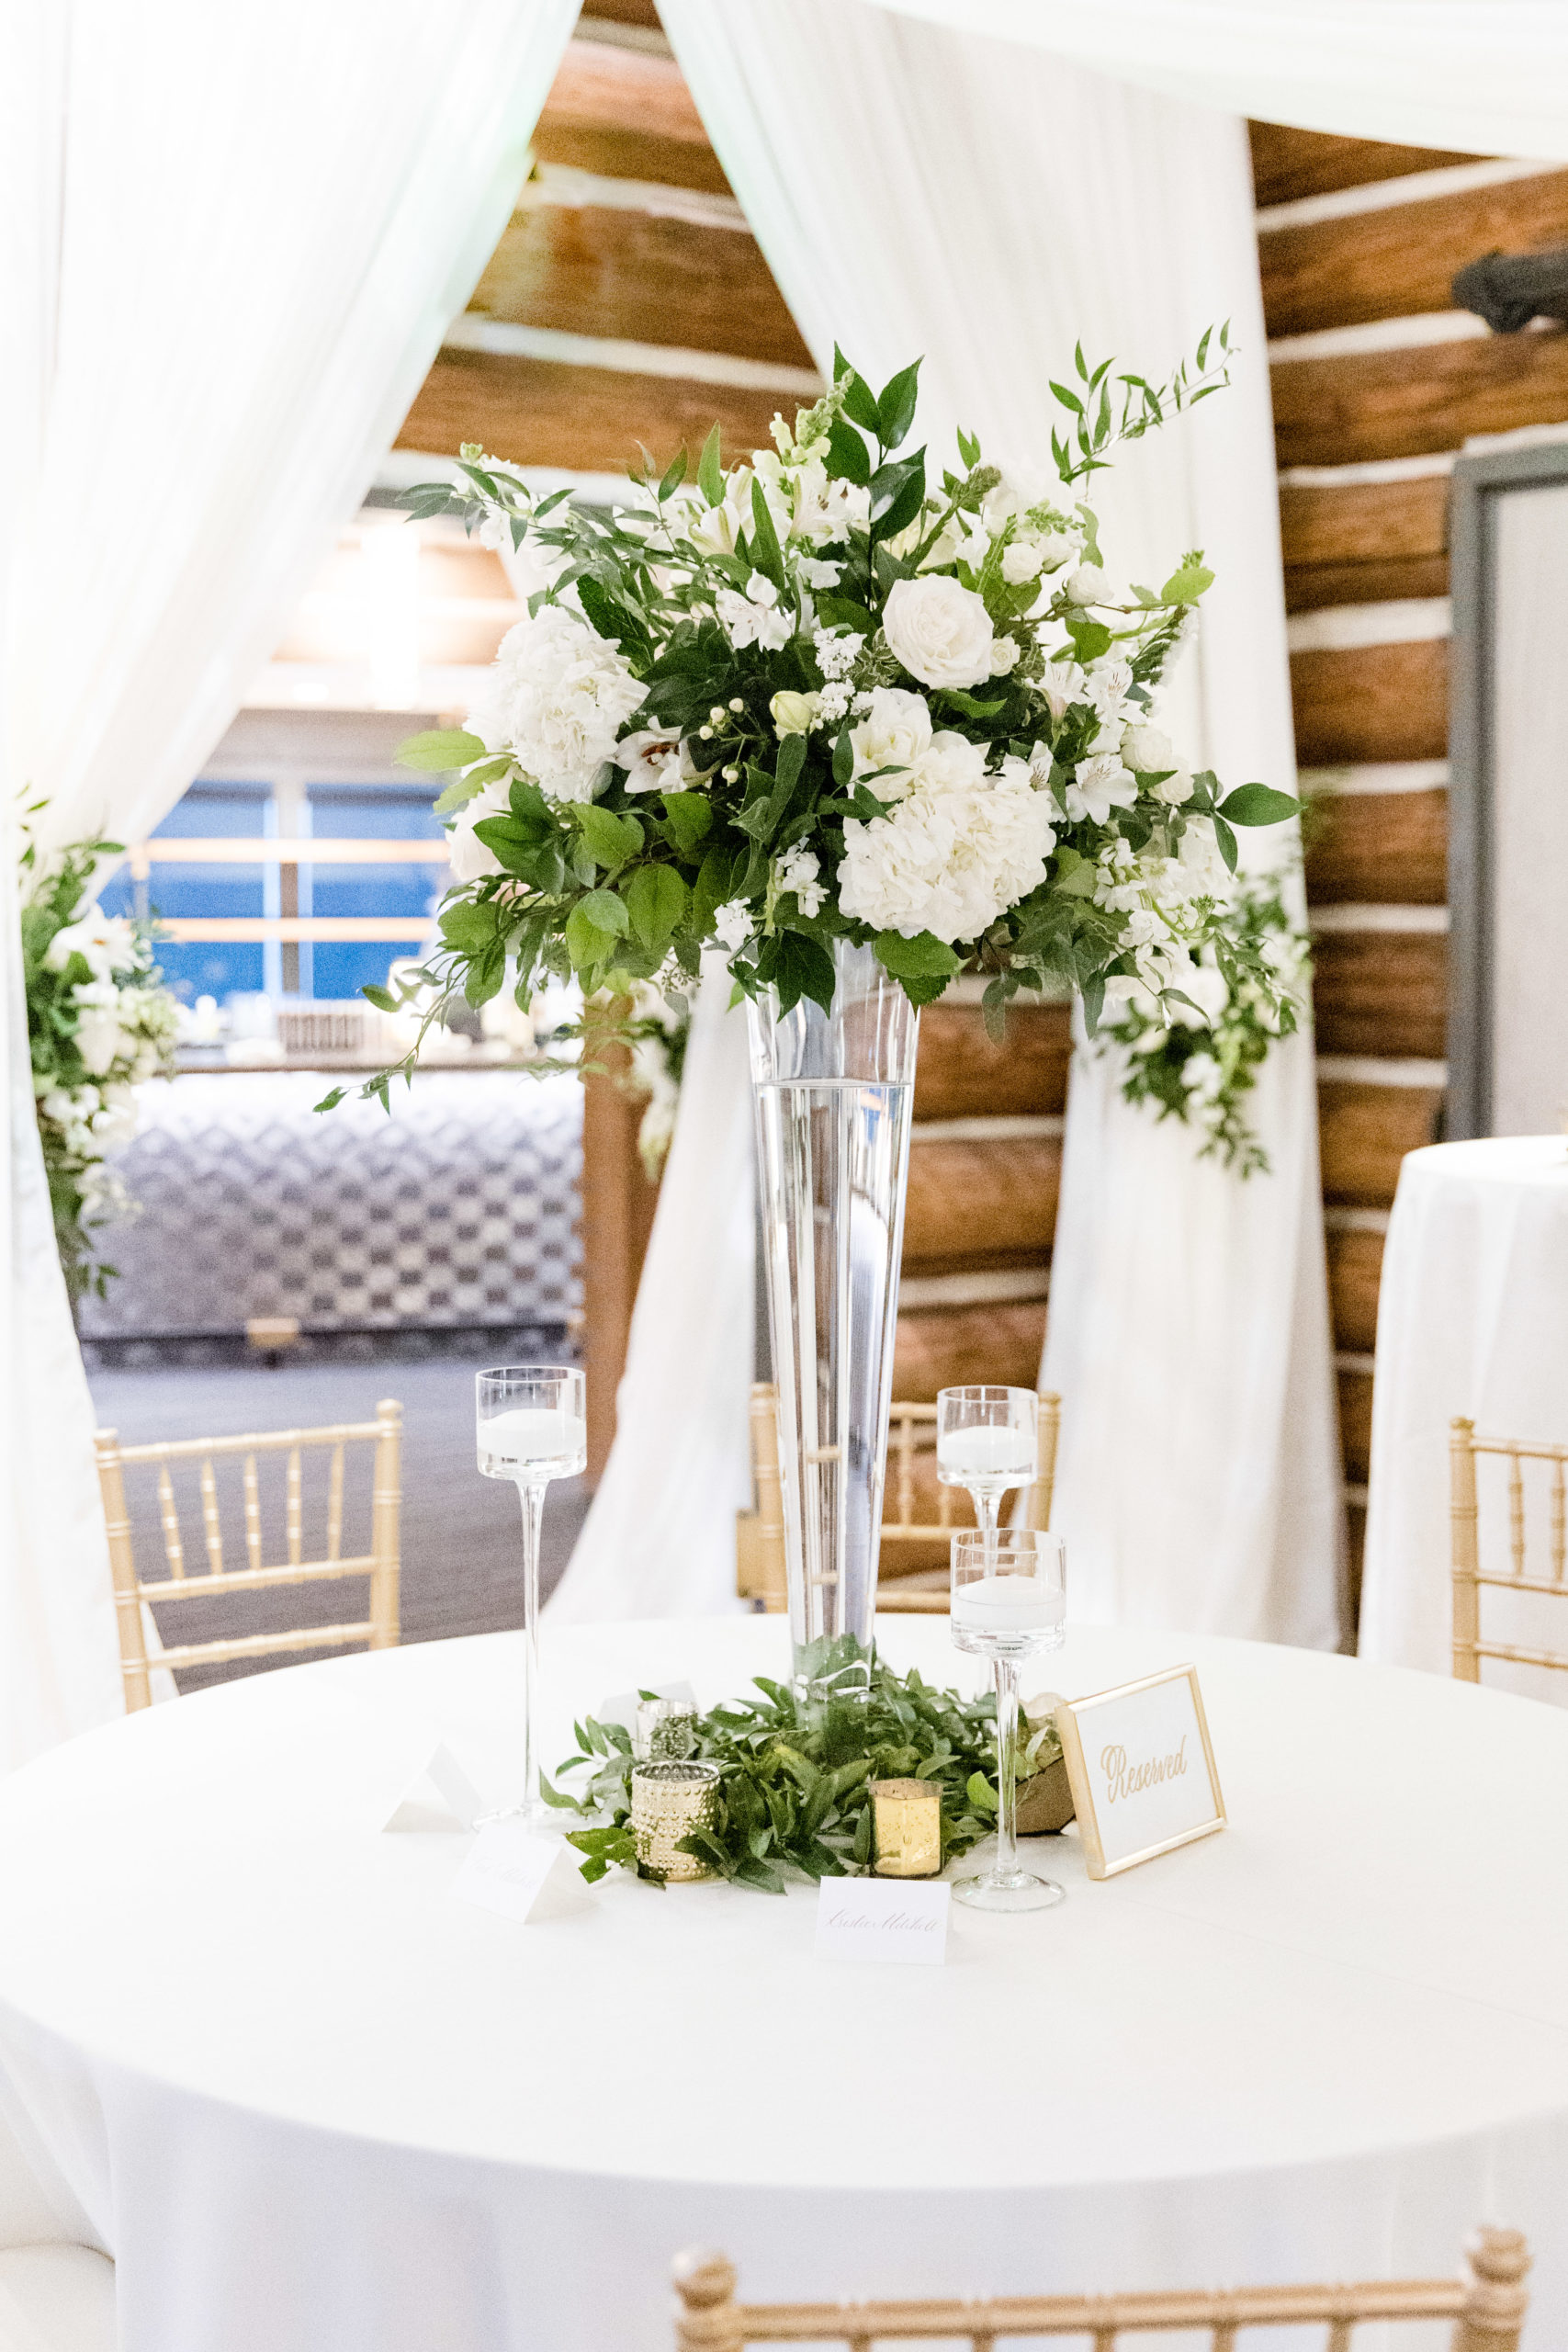 White floral centerpieces at wedding reception.